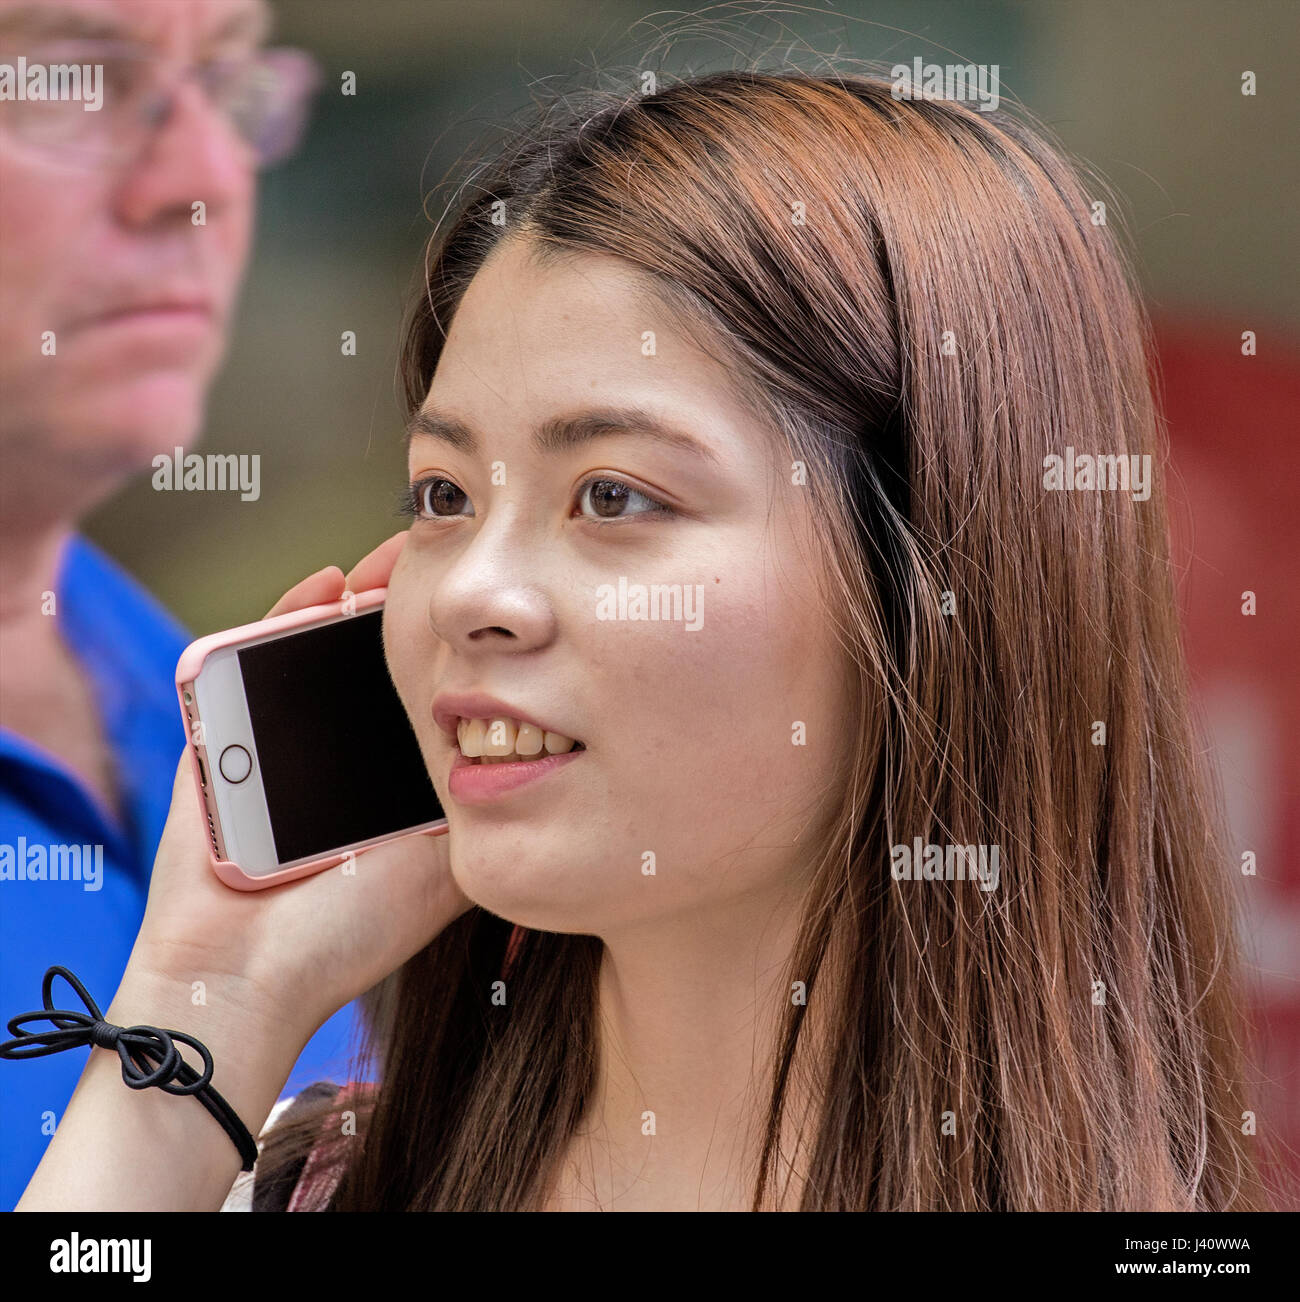 Asian girl/woman taking on mobile phone Banque D'Images